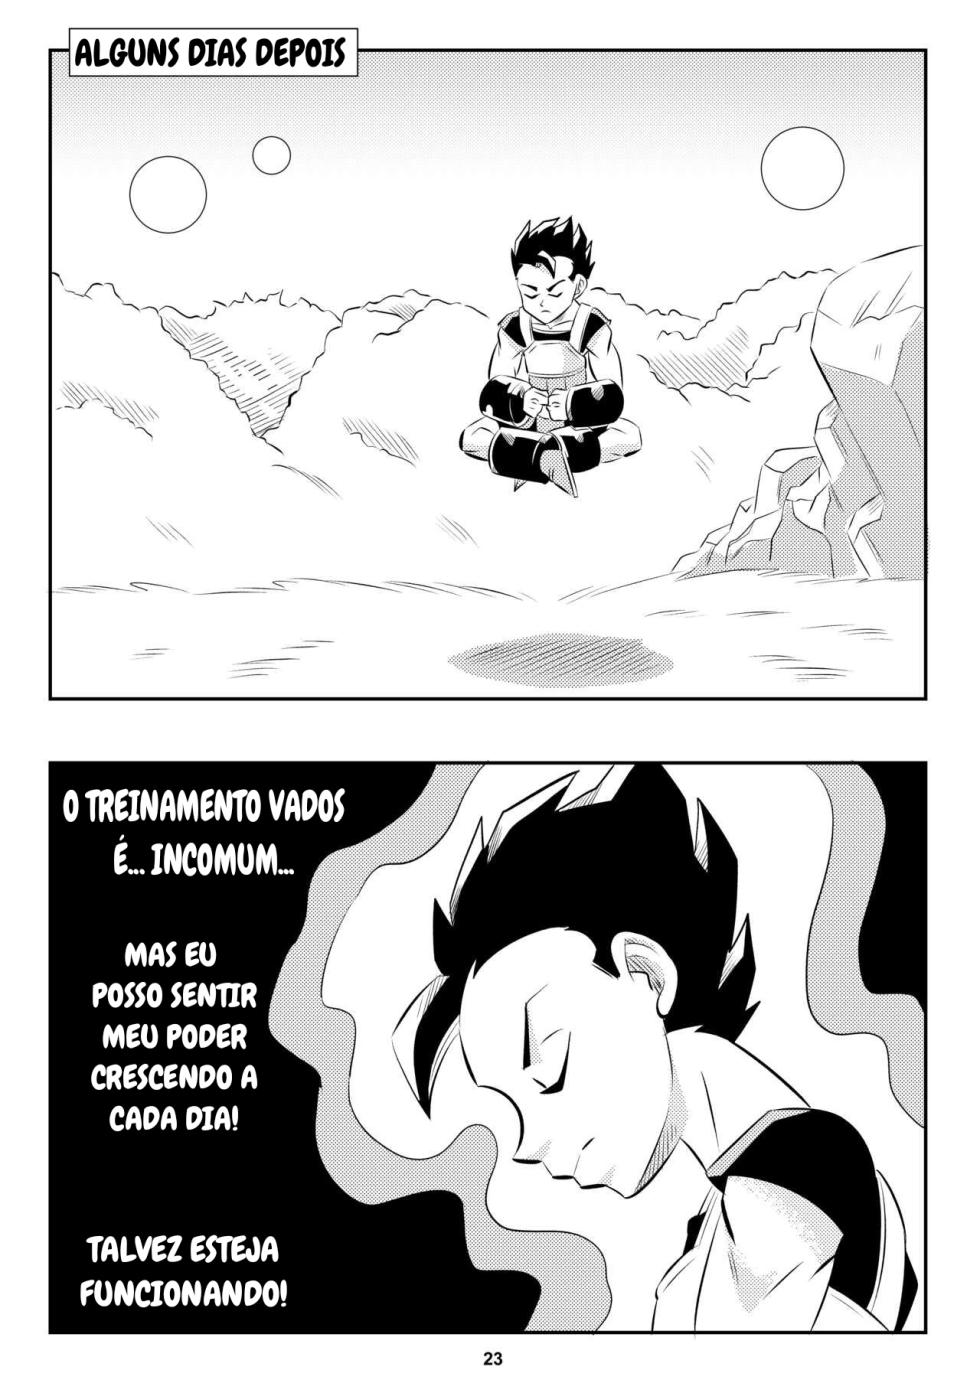 Heavenly Training (Dragon Ball Super) - Page 24